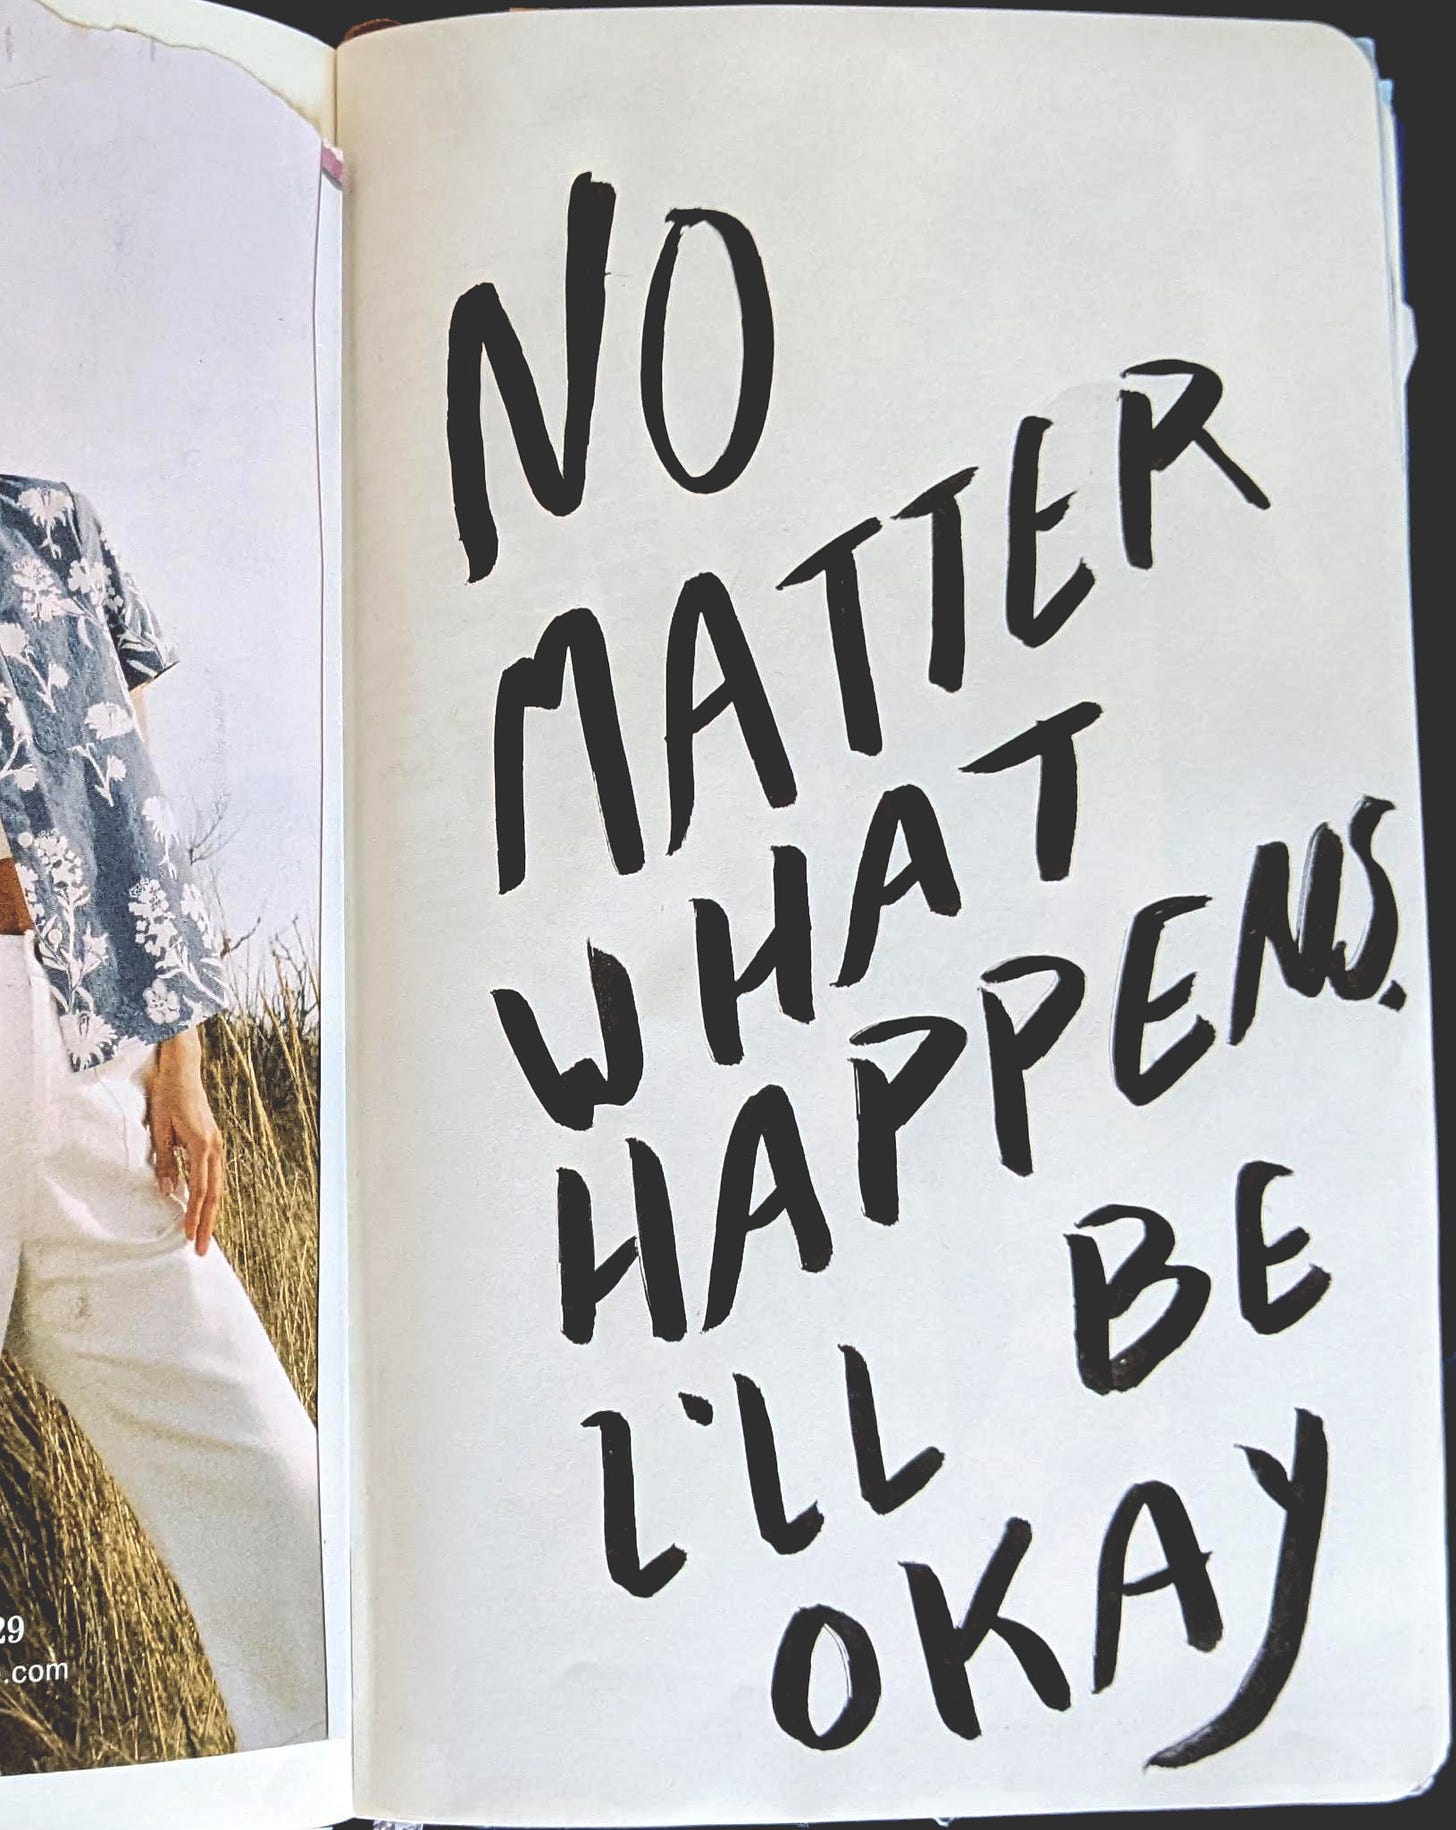 calligraphy of the text "No matter what happens, I'll be okay"